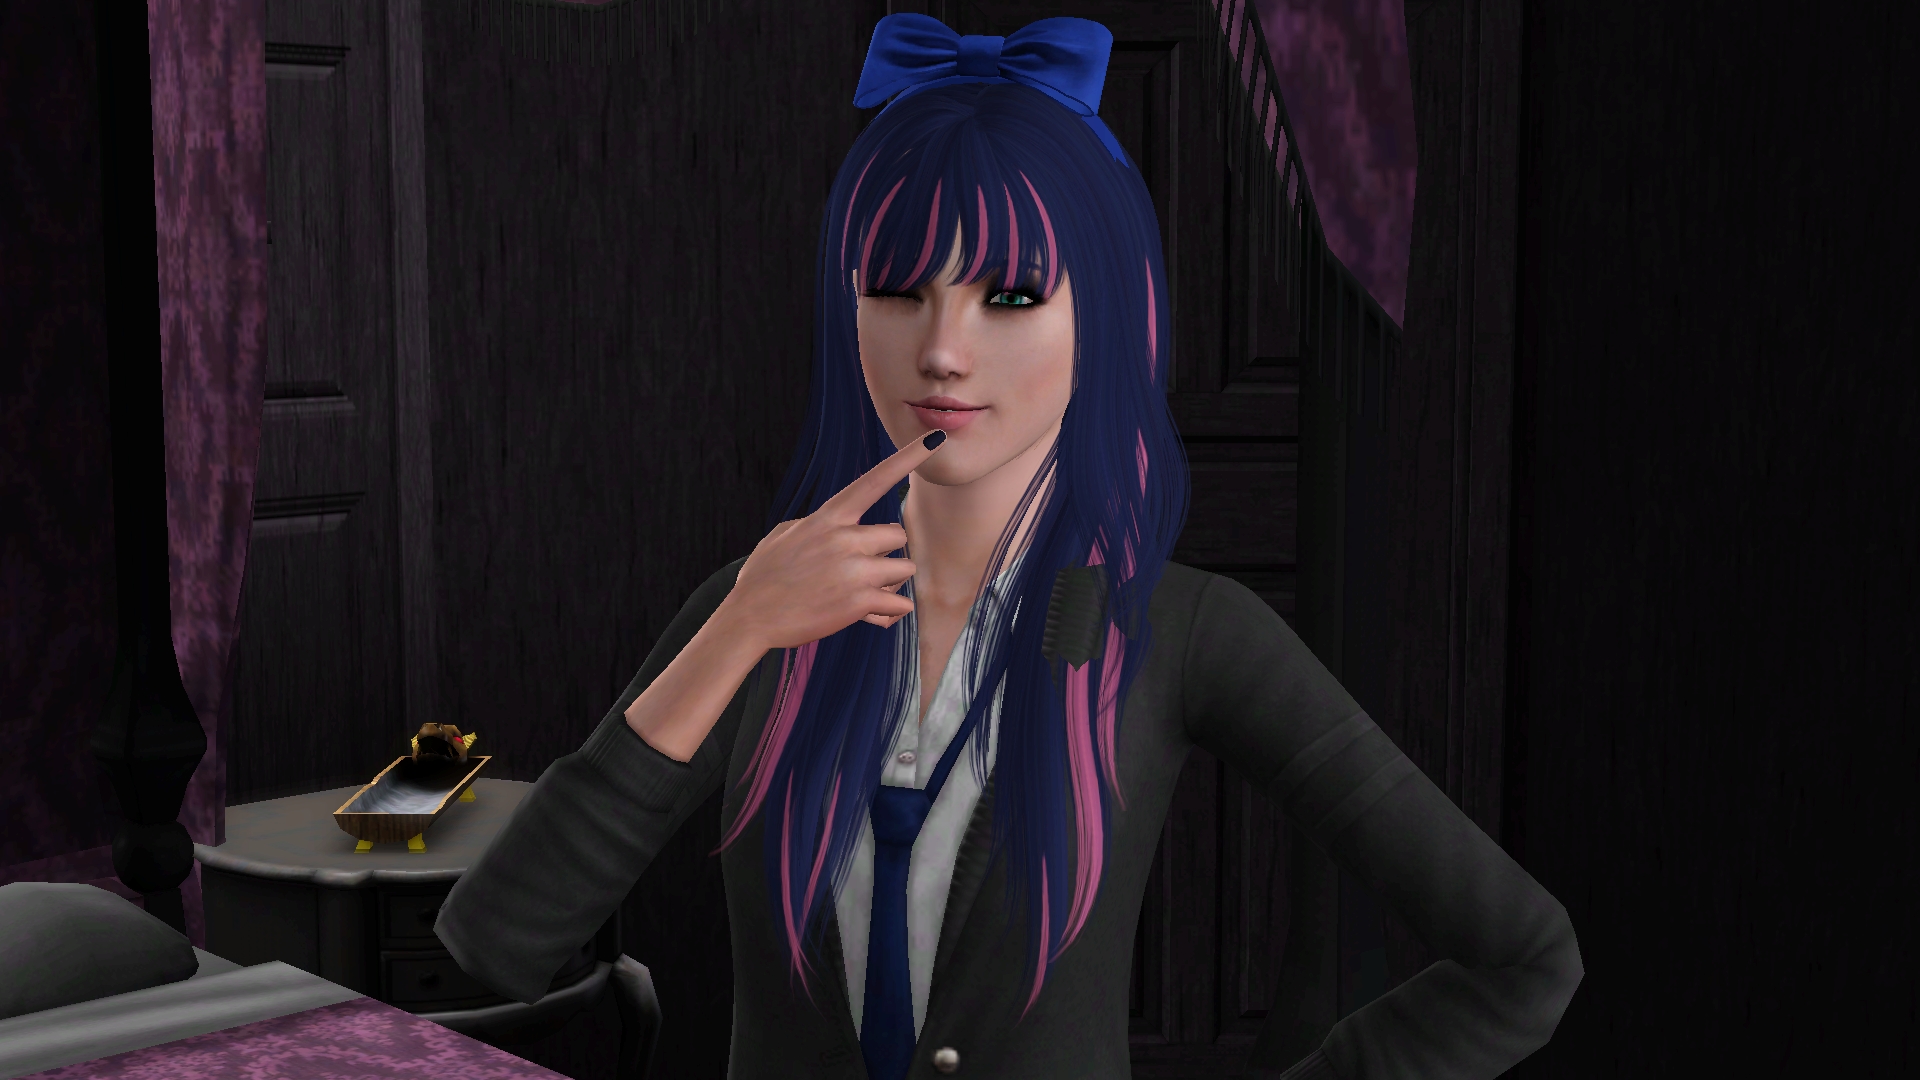 Sims 3 - Stocking Anarchy by Tx-Slade-xT on DeviantArt